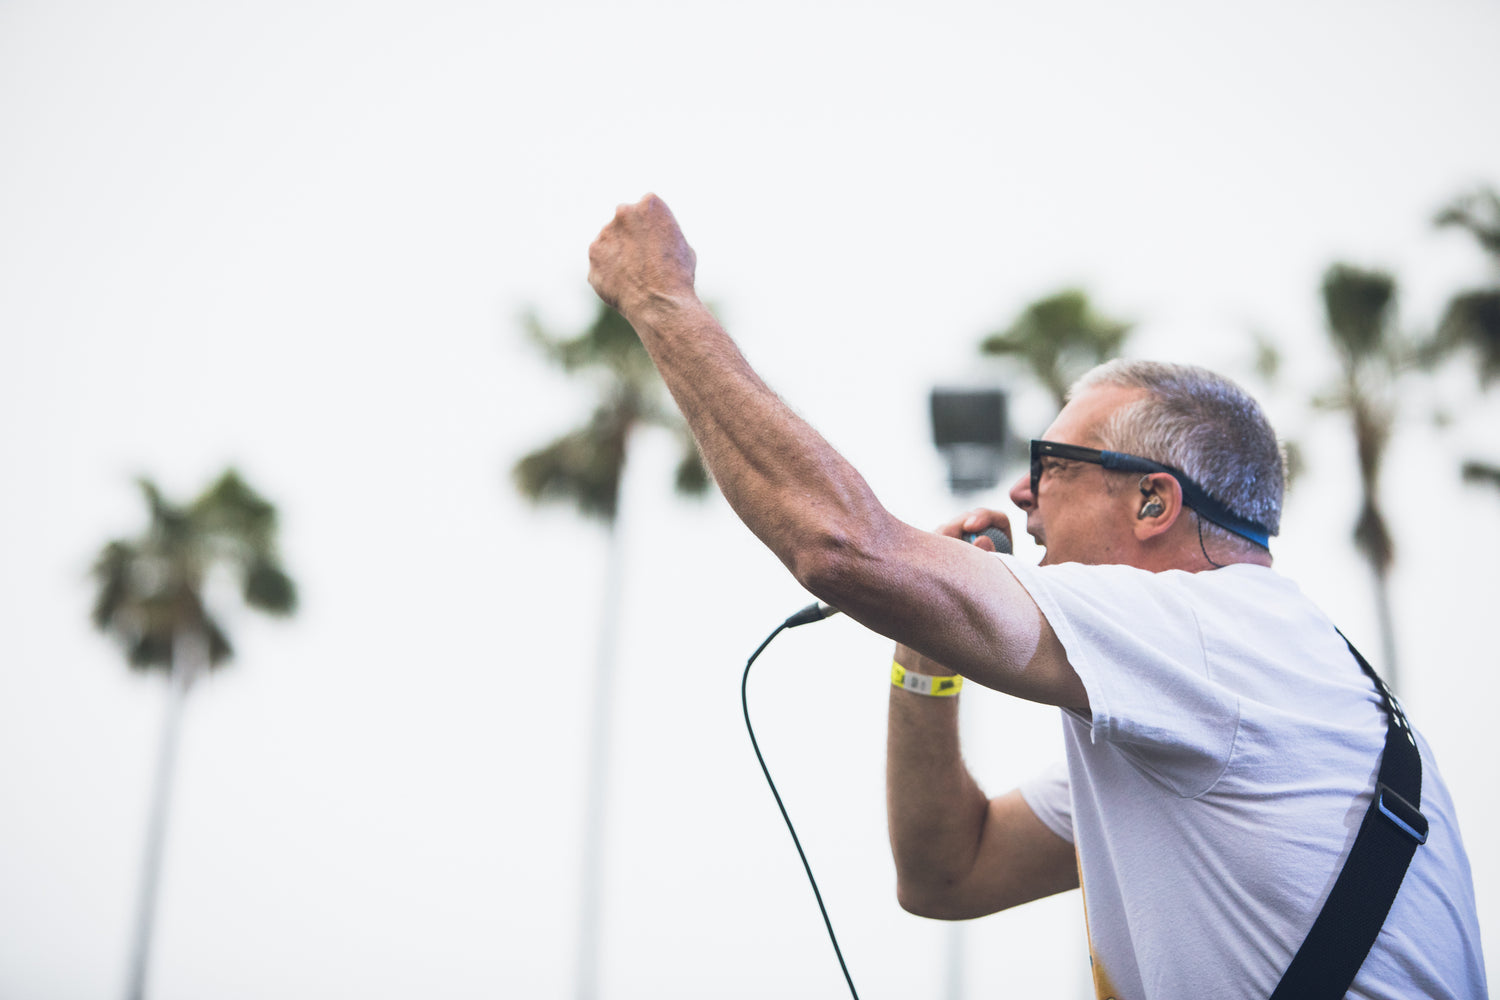 Descendents, The Vandals, Dead Kennedys Top Punk In the Park San Francisco